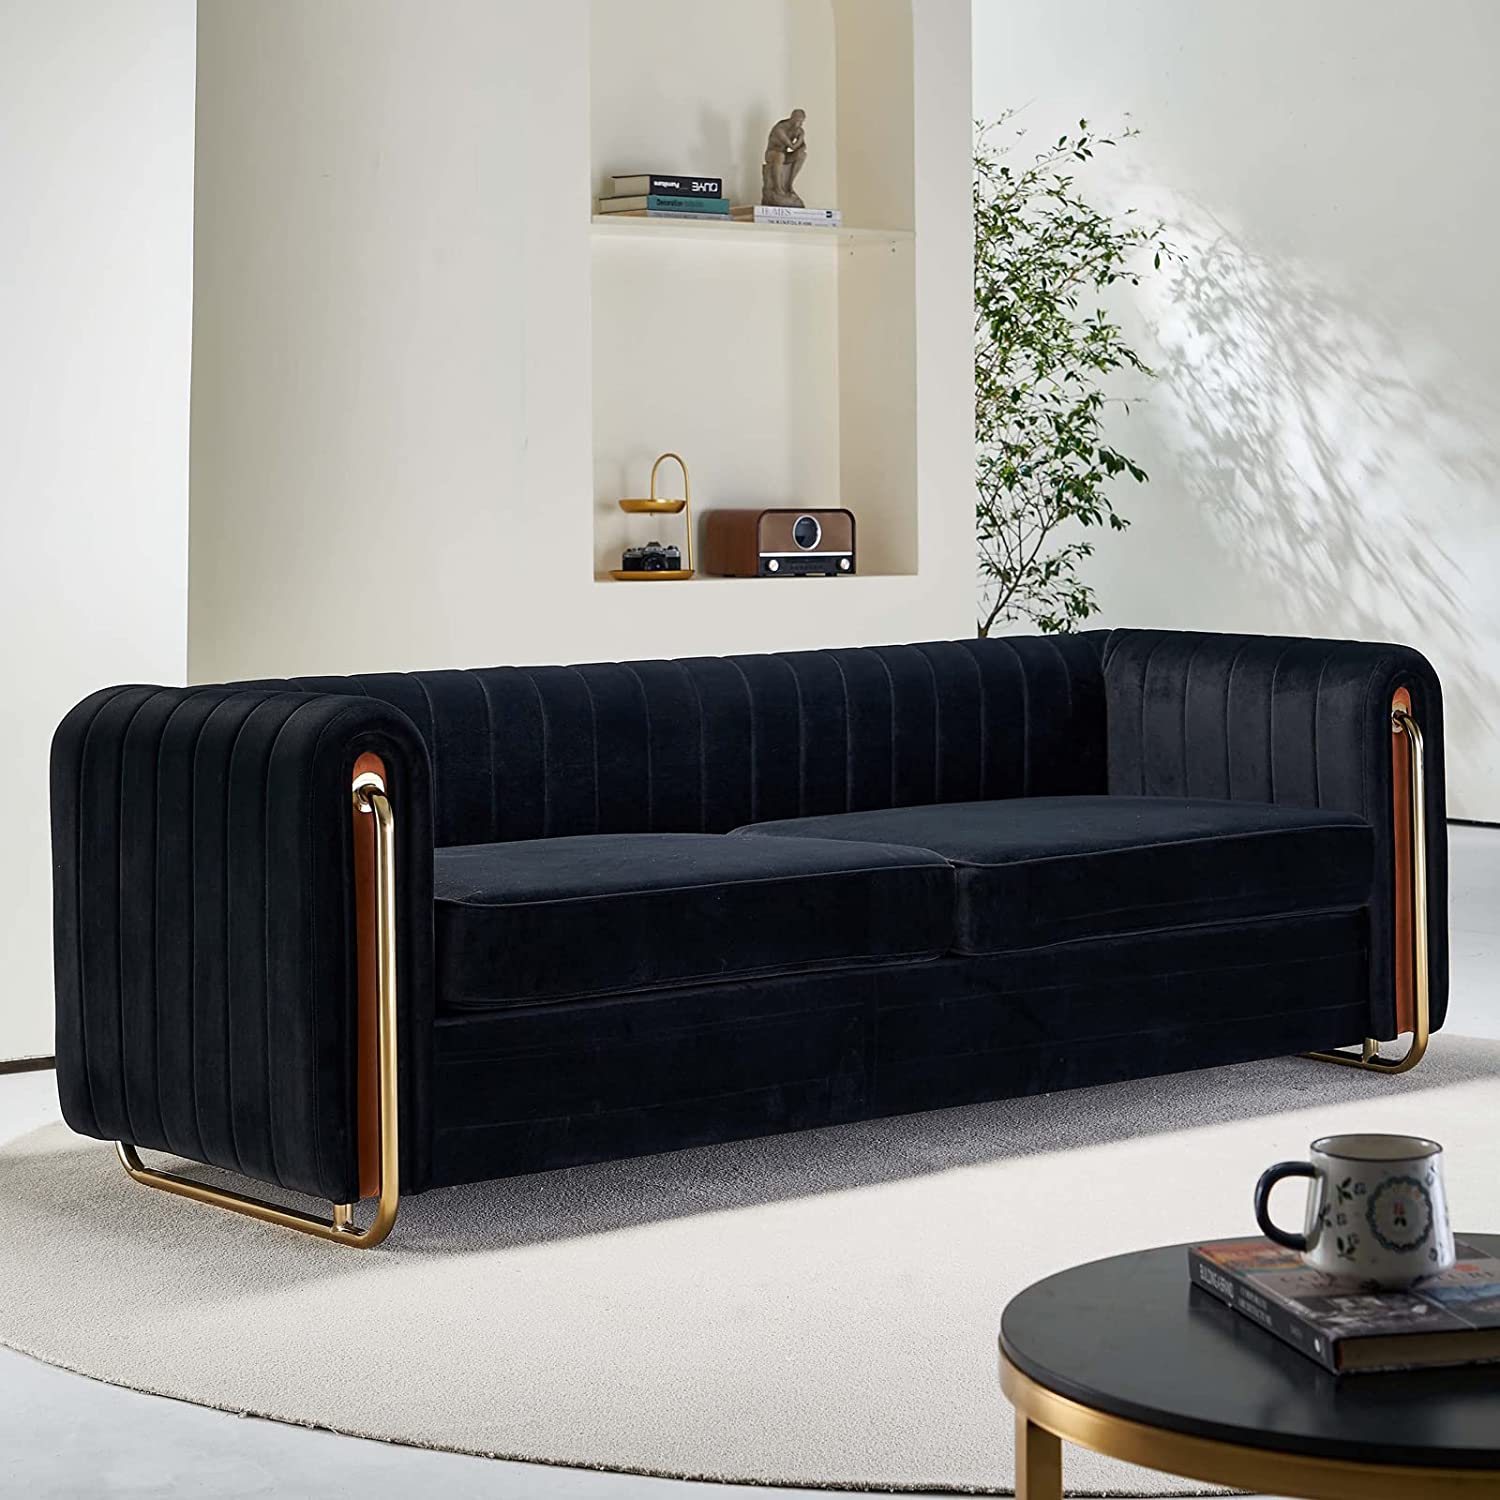 51 Black Couches that Blend Comfort and Chic Visual Drama thumbnail